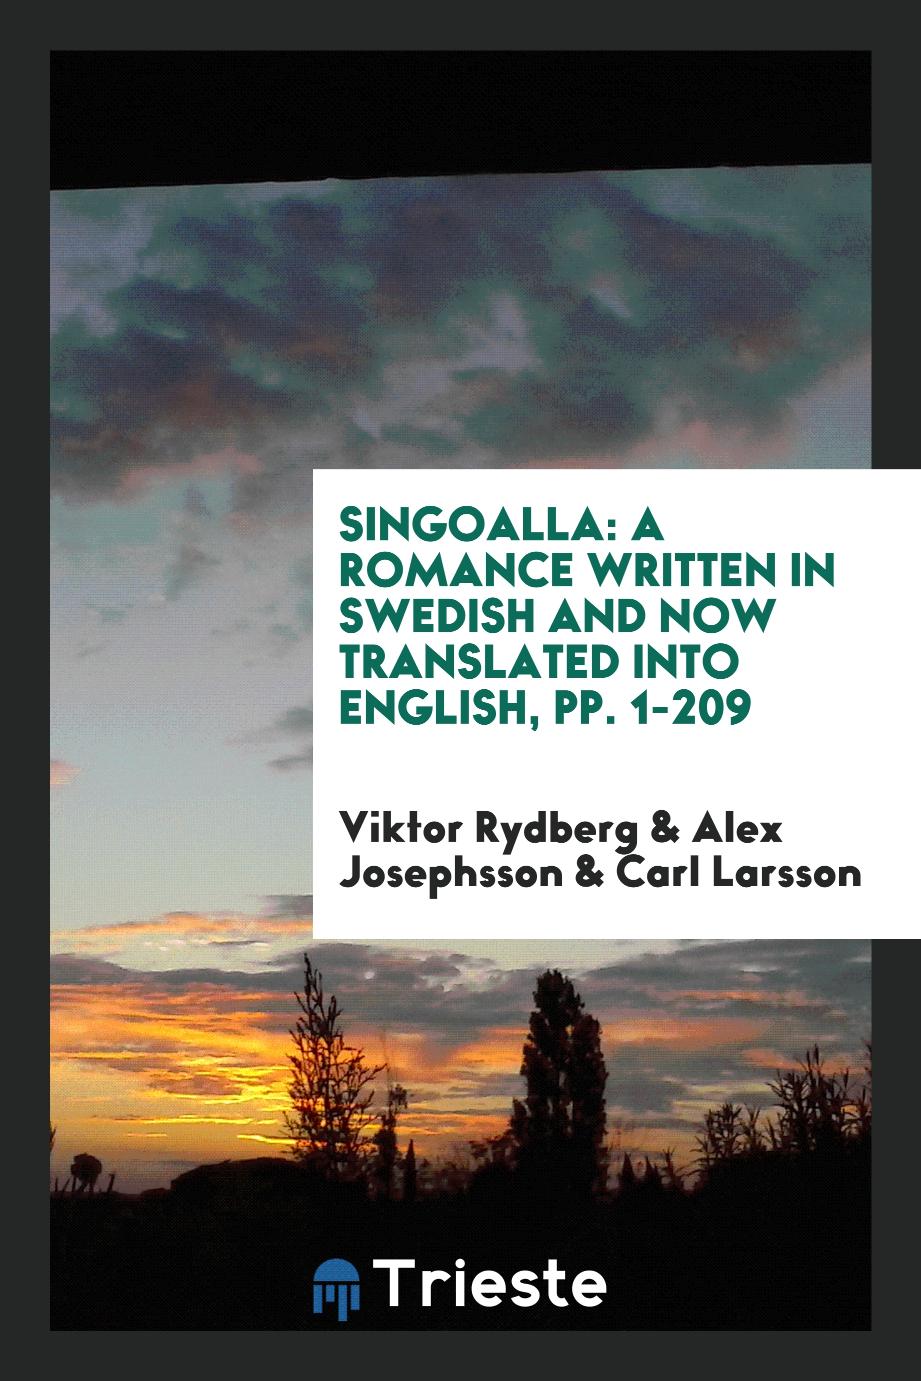 Singoalla: A Romance Written in Swedish and Now Translated into English, pp. 1-209